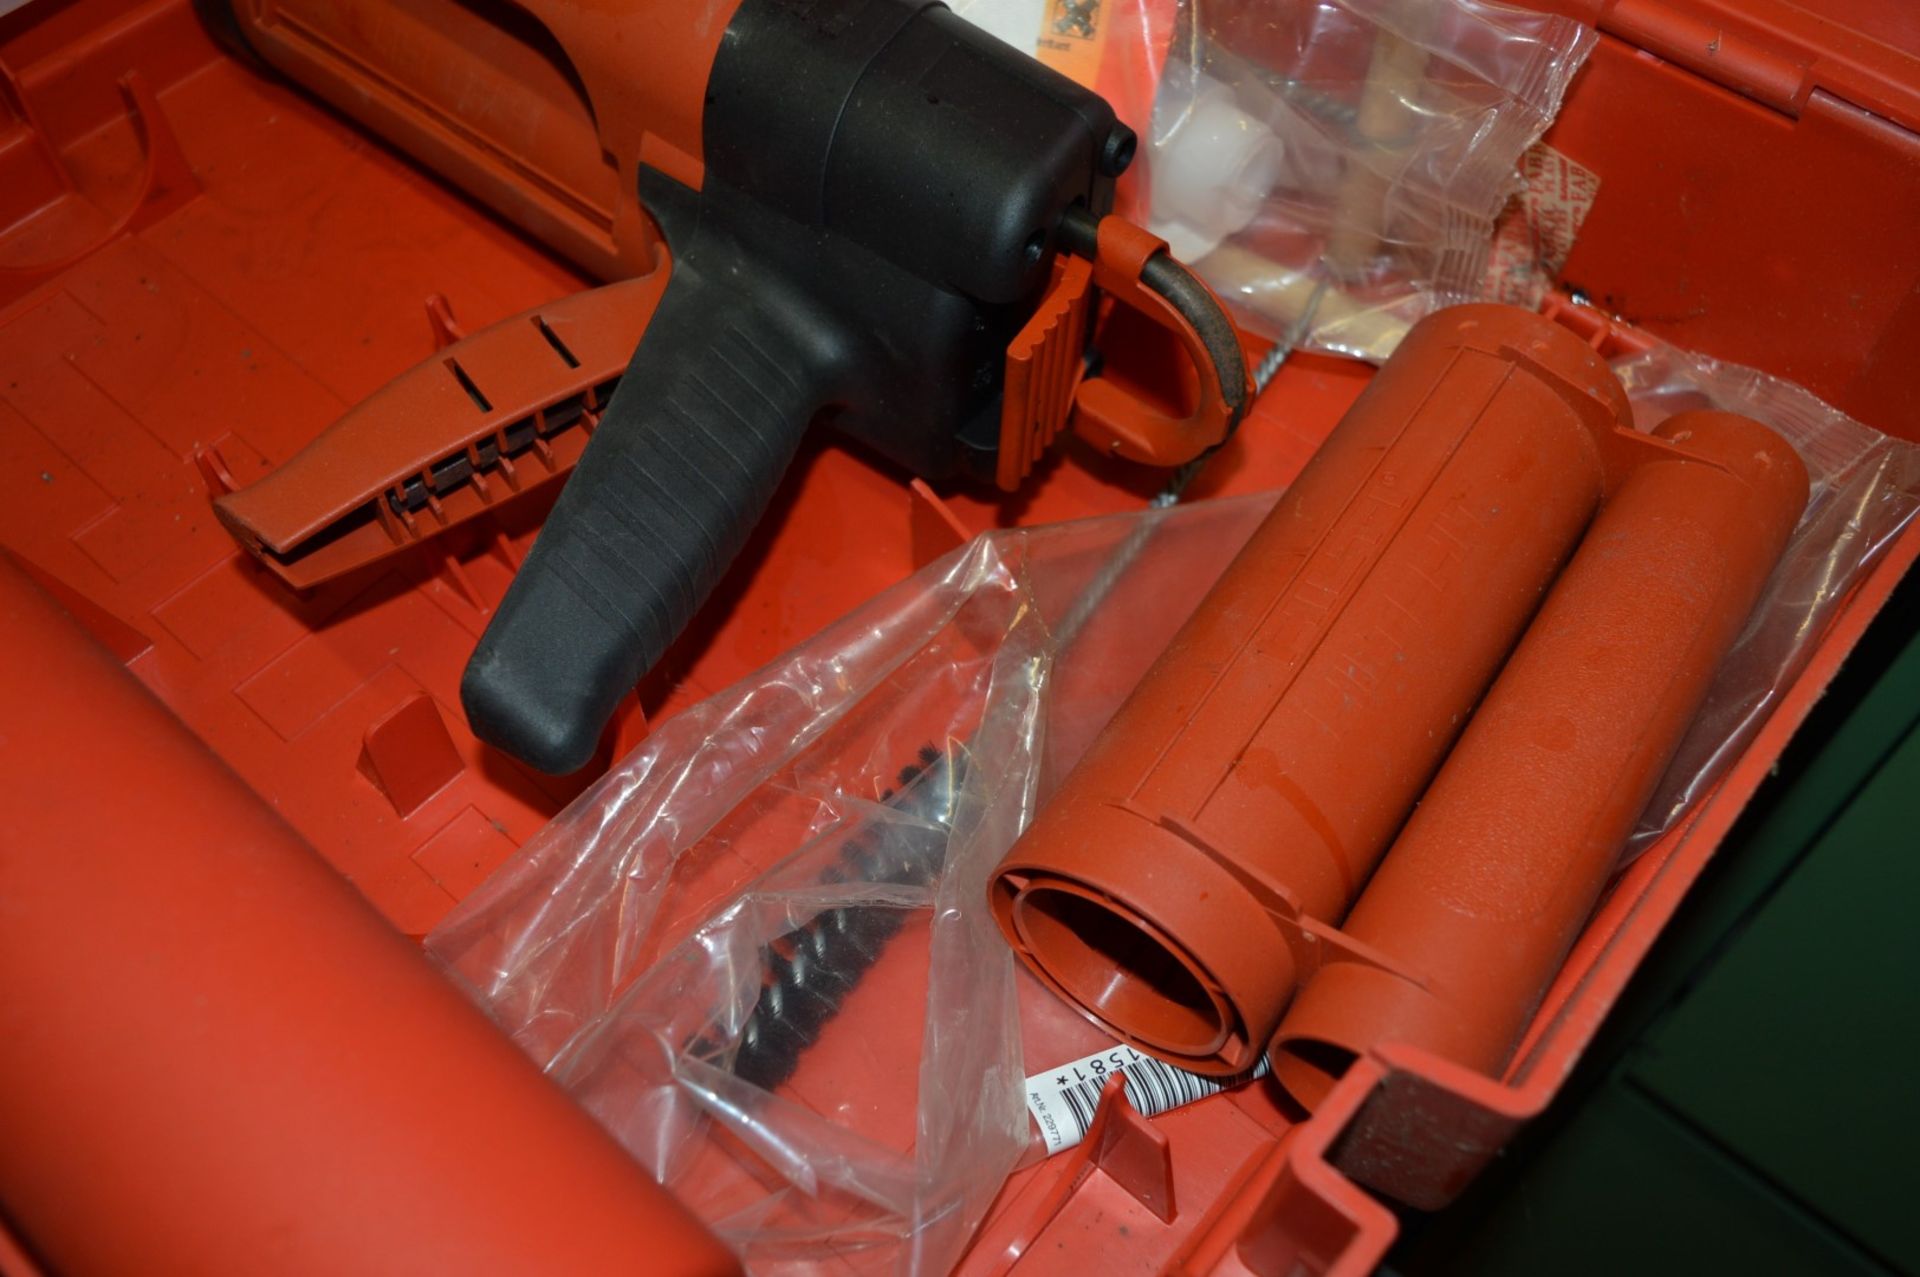 1 x Hilti MD2000 Manual HIT Adhesive Dispenser With Case, Accessories and HIT-HY 150 Pack - Ref: - Image 6 of 7